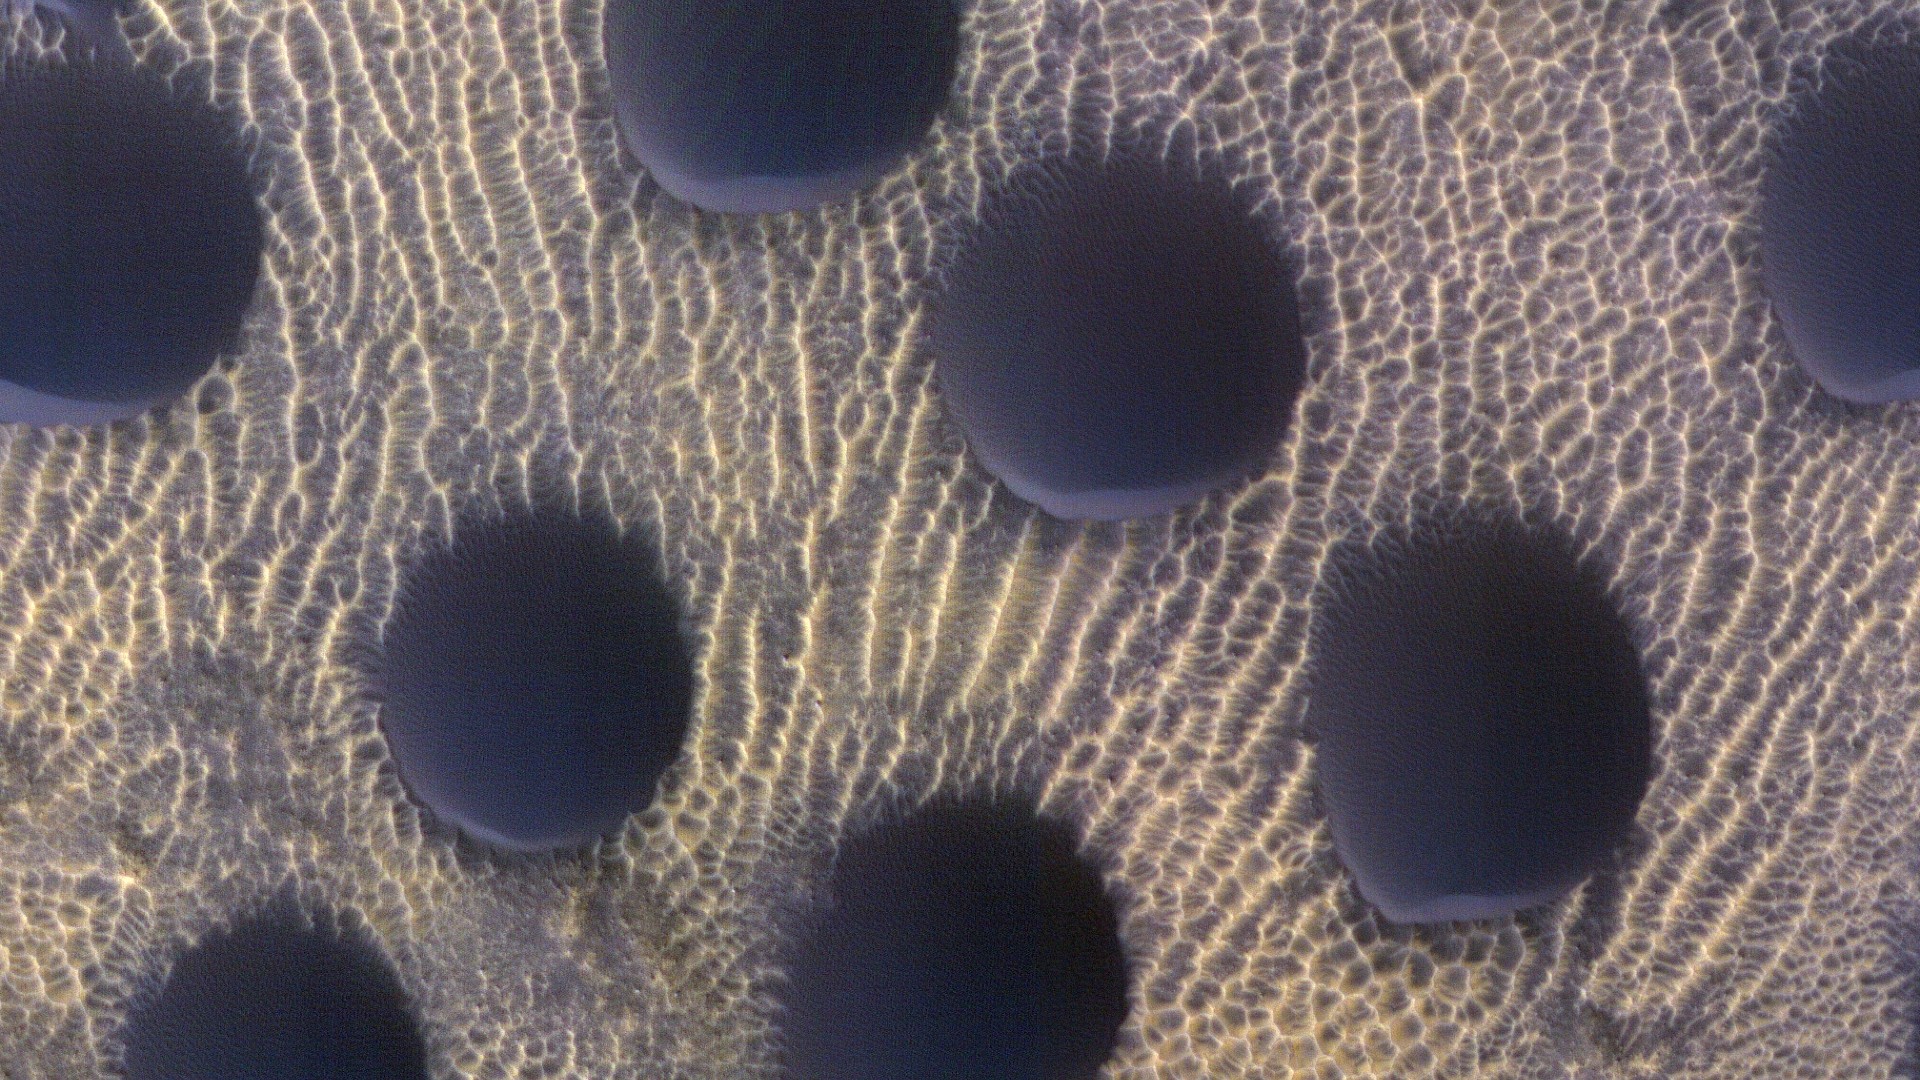 Strange circular dunes on Mars spotted in these NASA photos